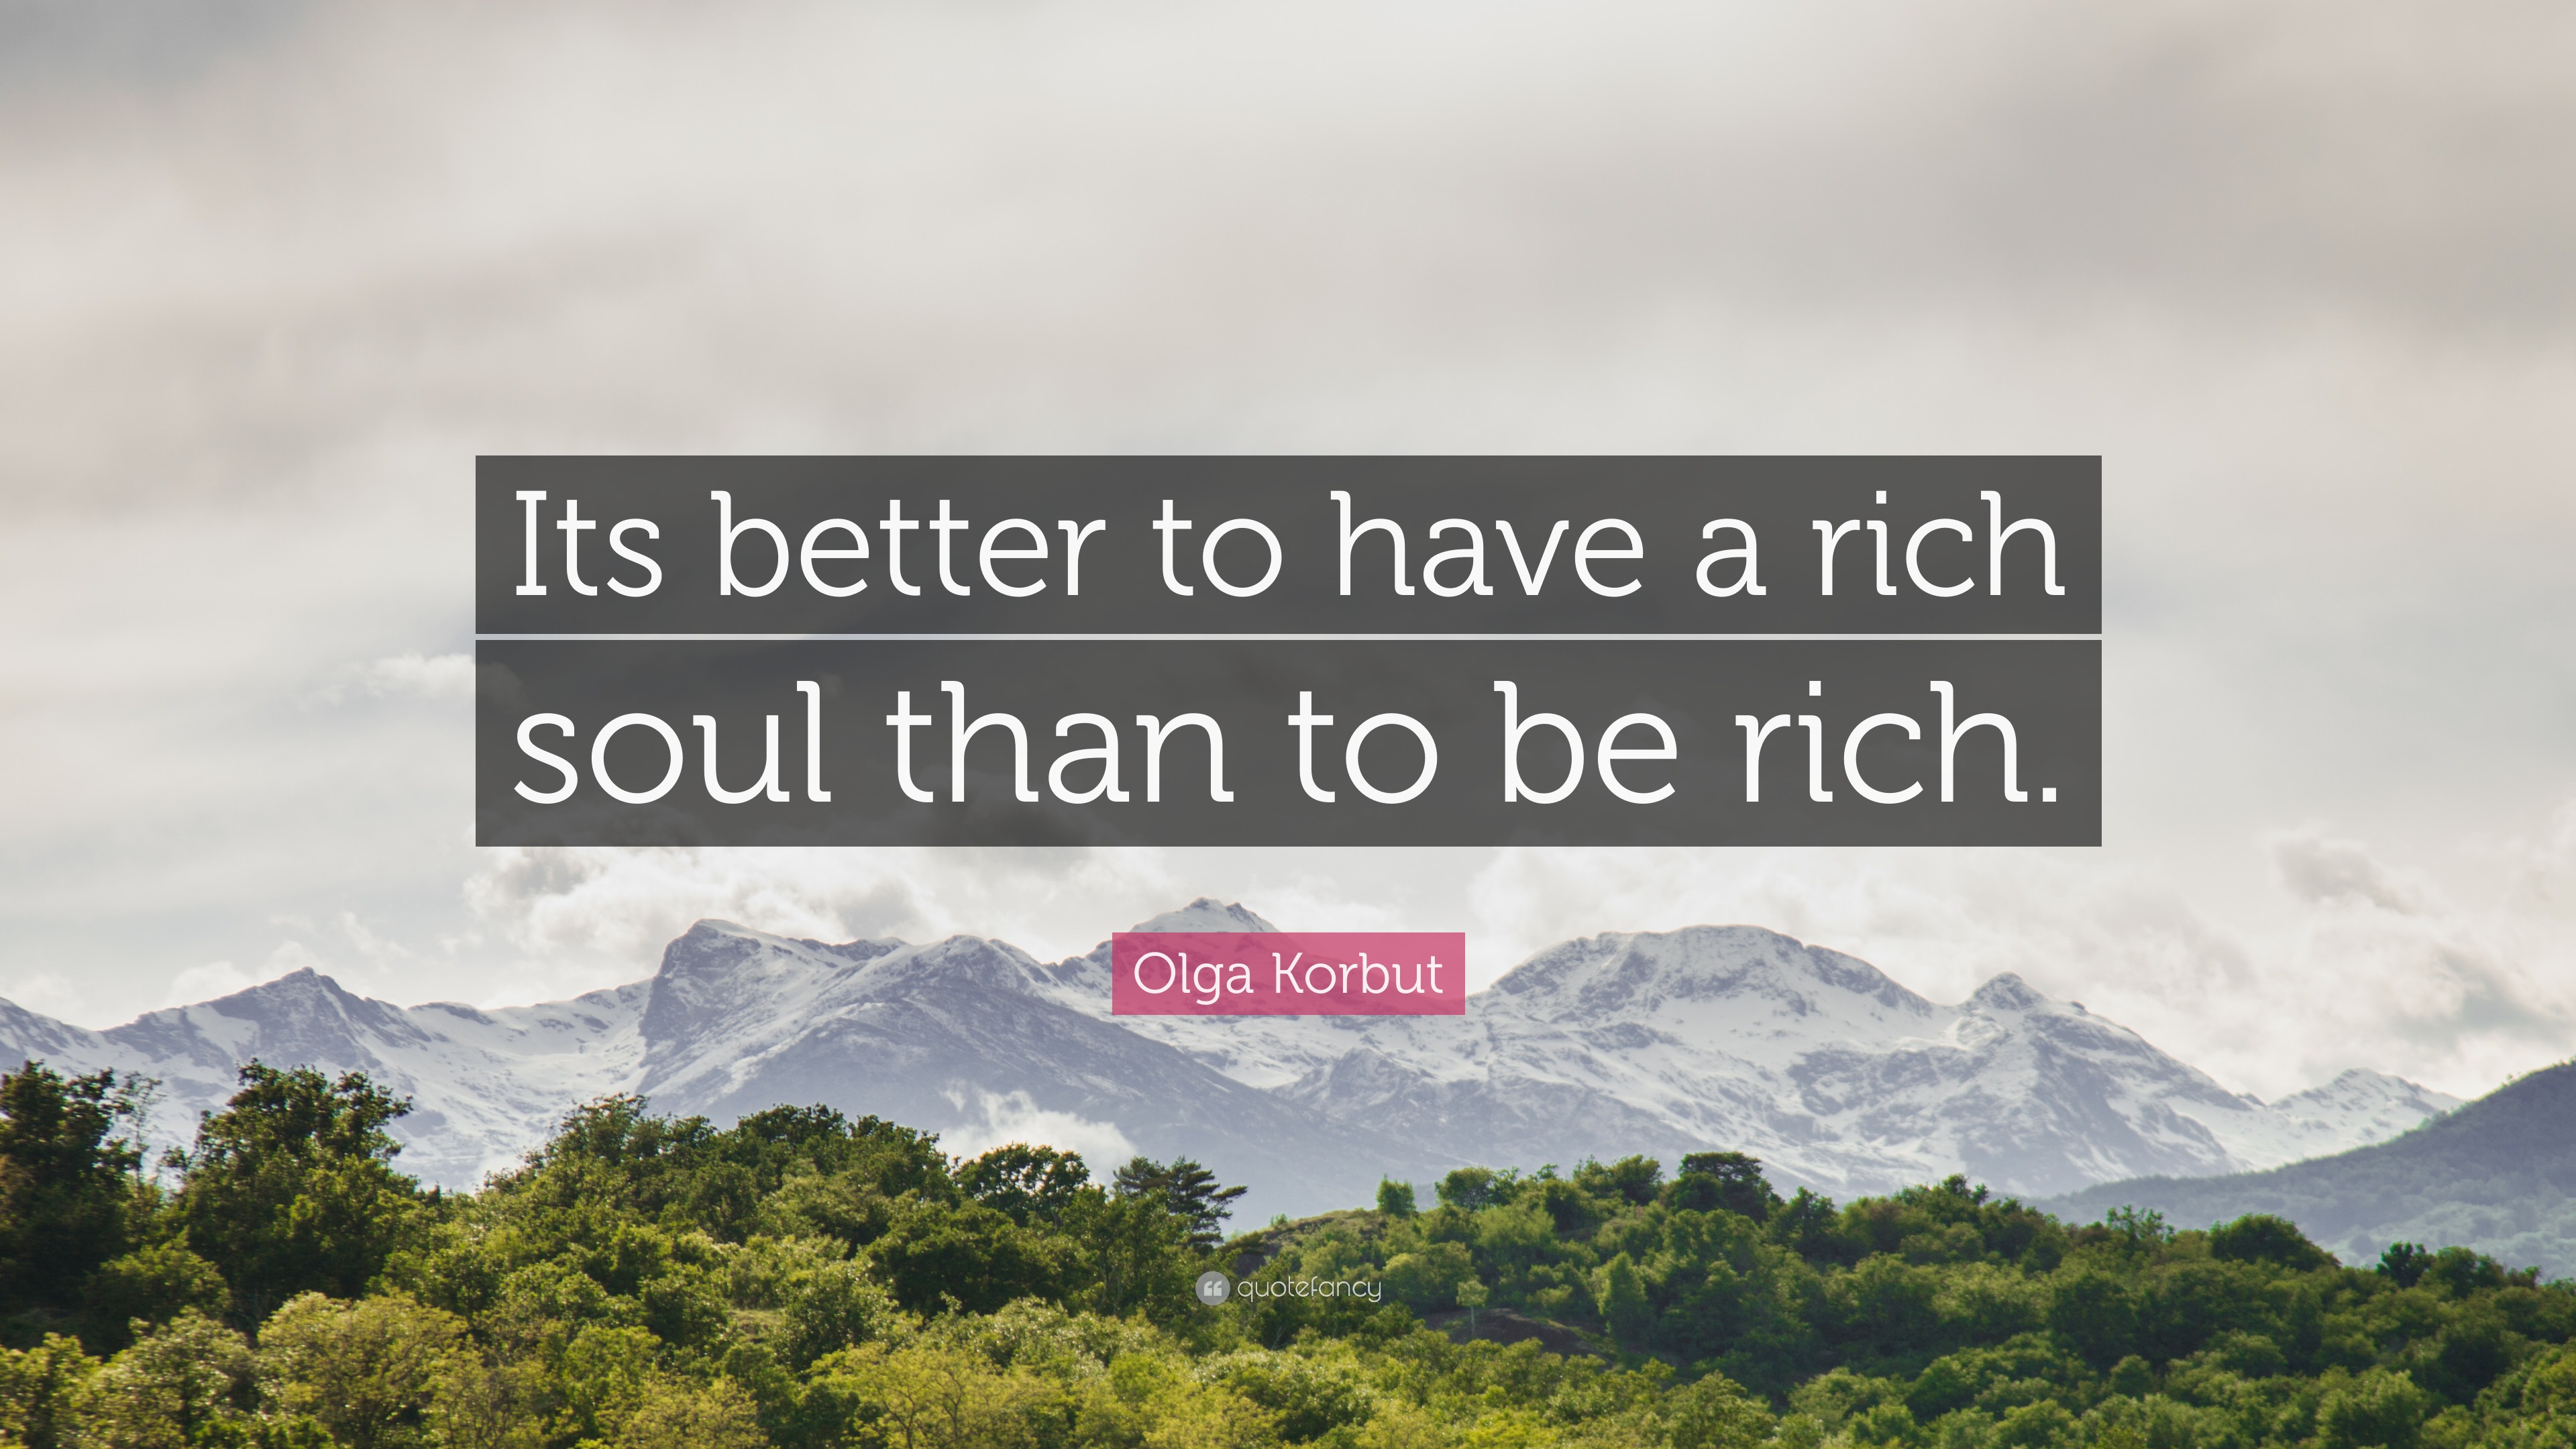 Its better to have a rich soul than to be rich